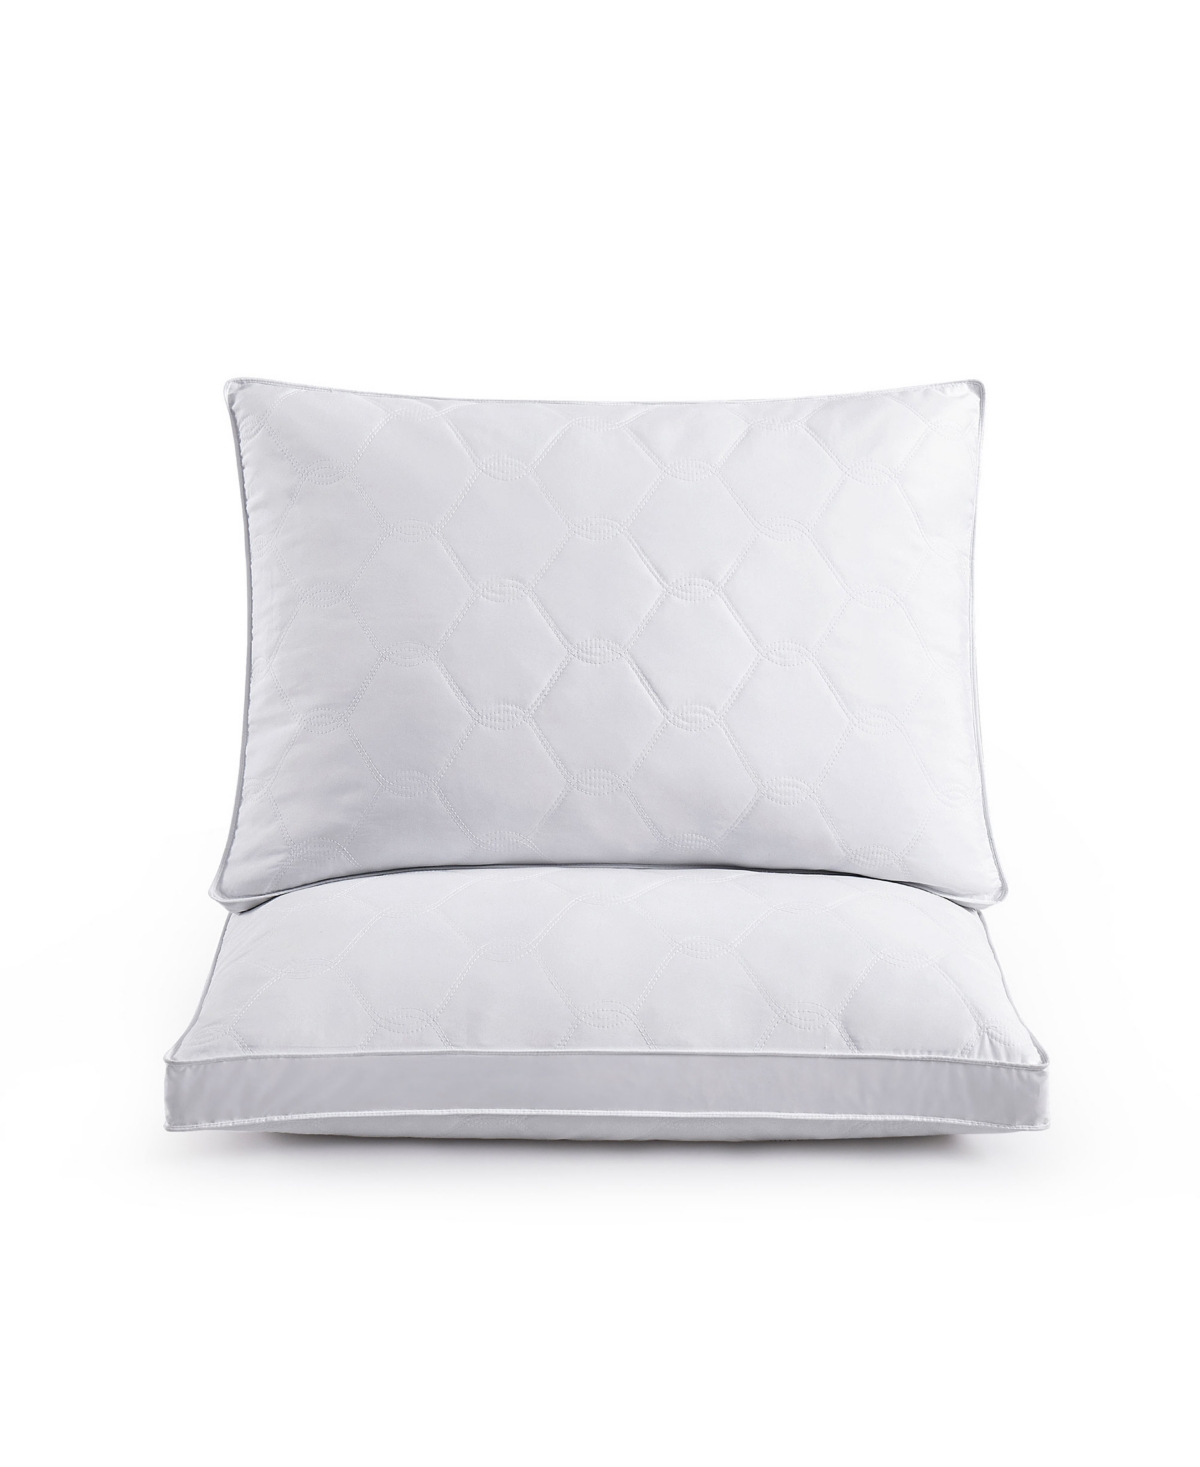 Unikome Diamond Quilted Down And Feather With Gusseted Edge 2-pack Pillows, Standard/queen In White